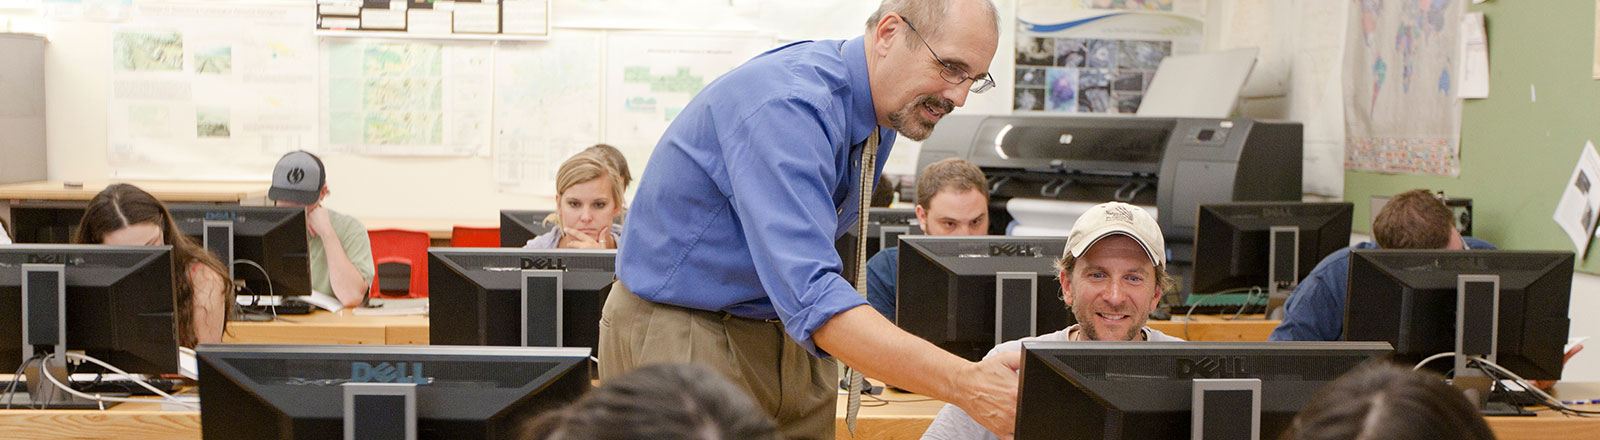 Geography professor and student working at computer